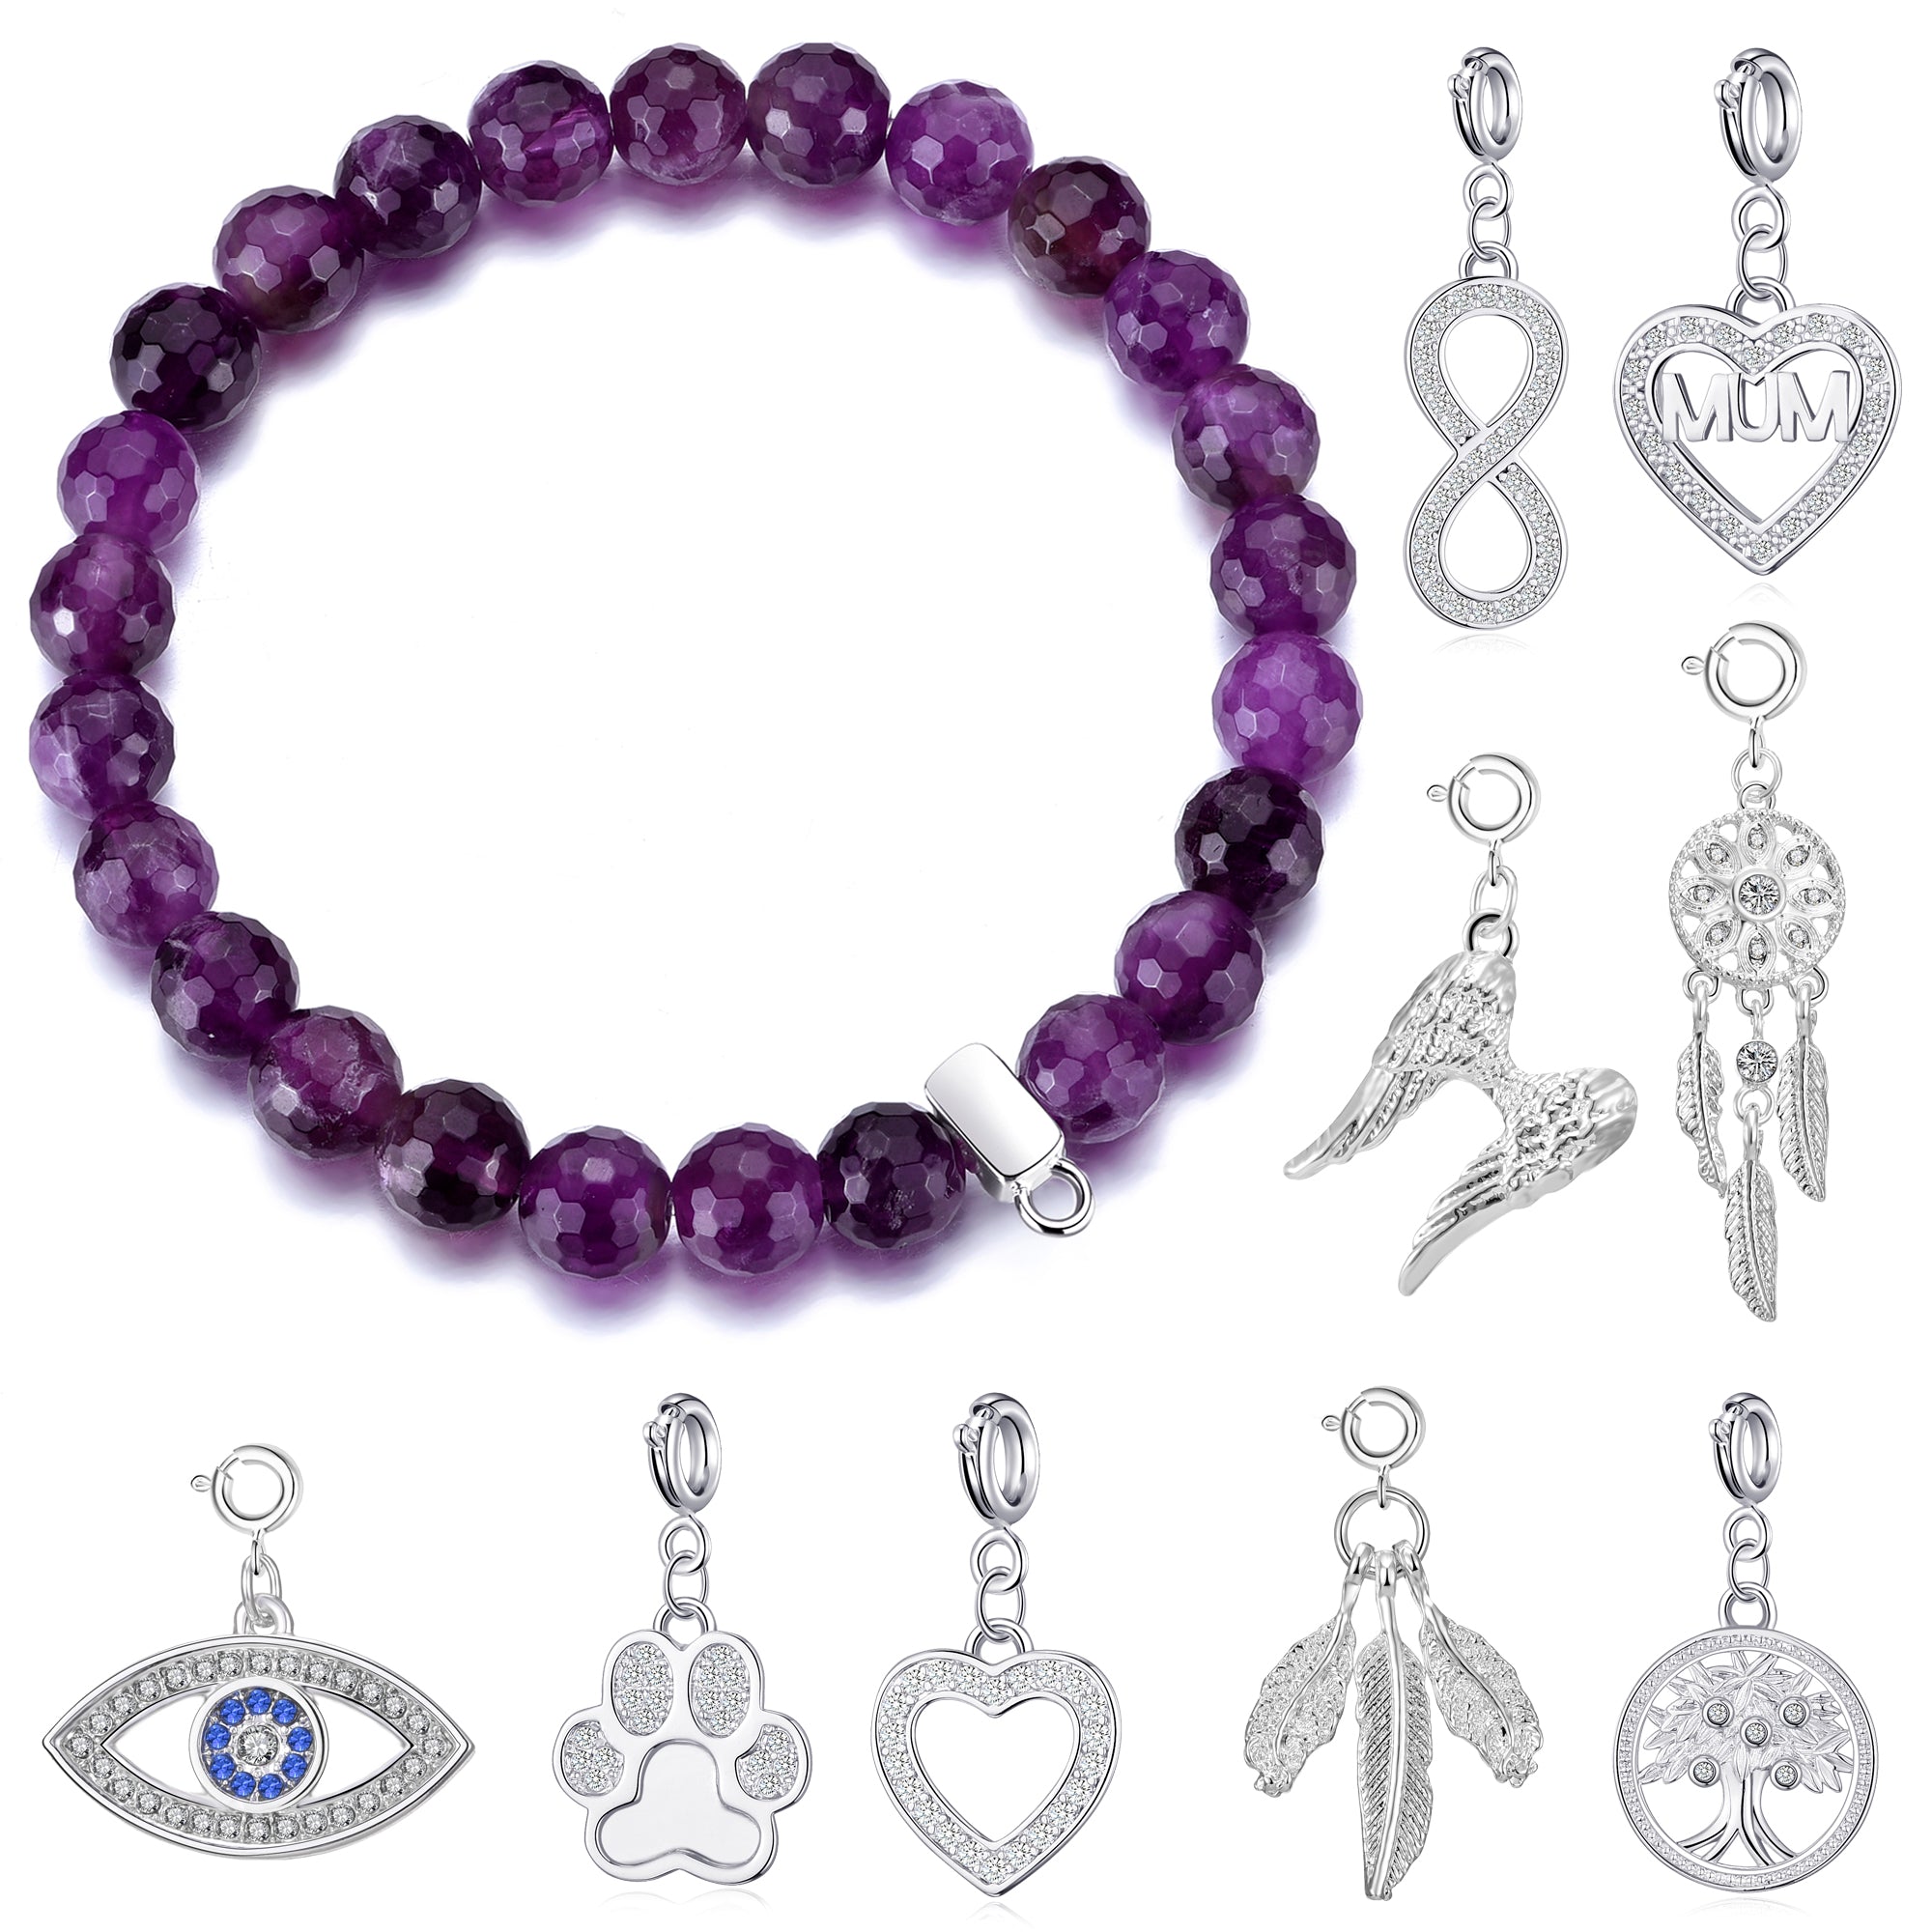 Faceted Amethyst Gemstone Stretch Bracelet with Charm Created with Zircondia® Crystals by Philip Jones Jewellery